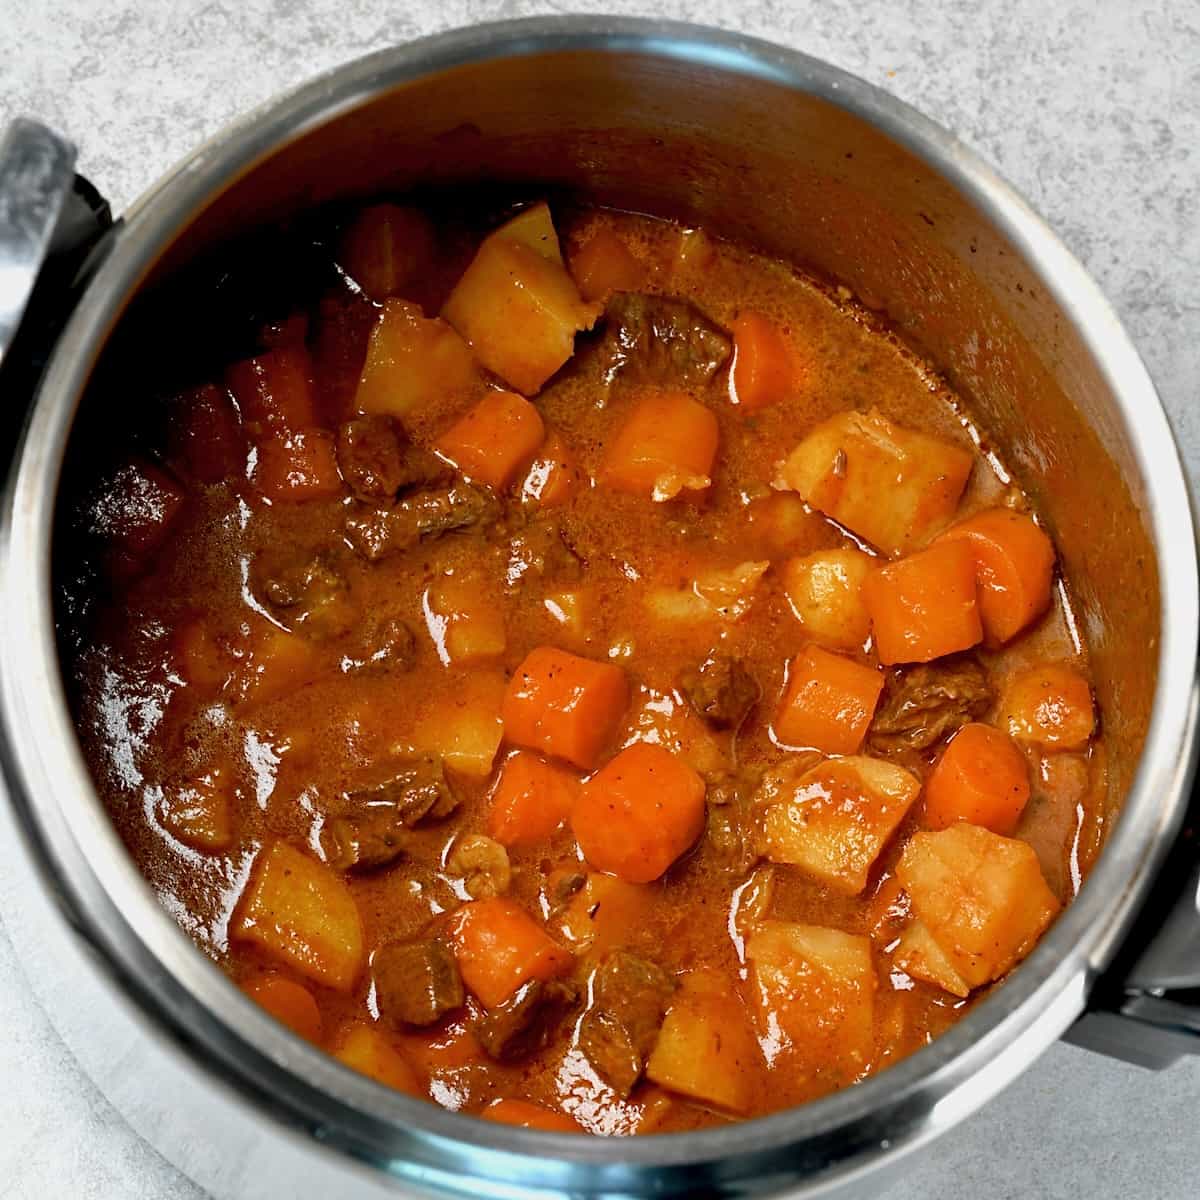 Beef stew with carrots and potatoes cooked in pressure cooker